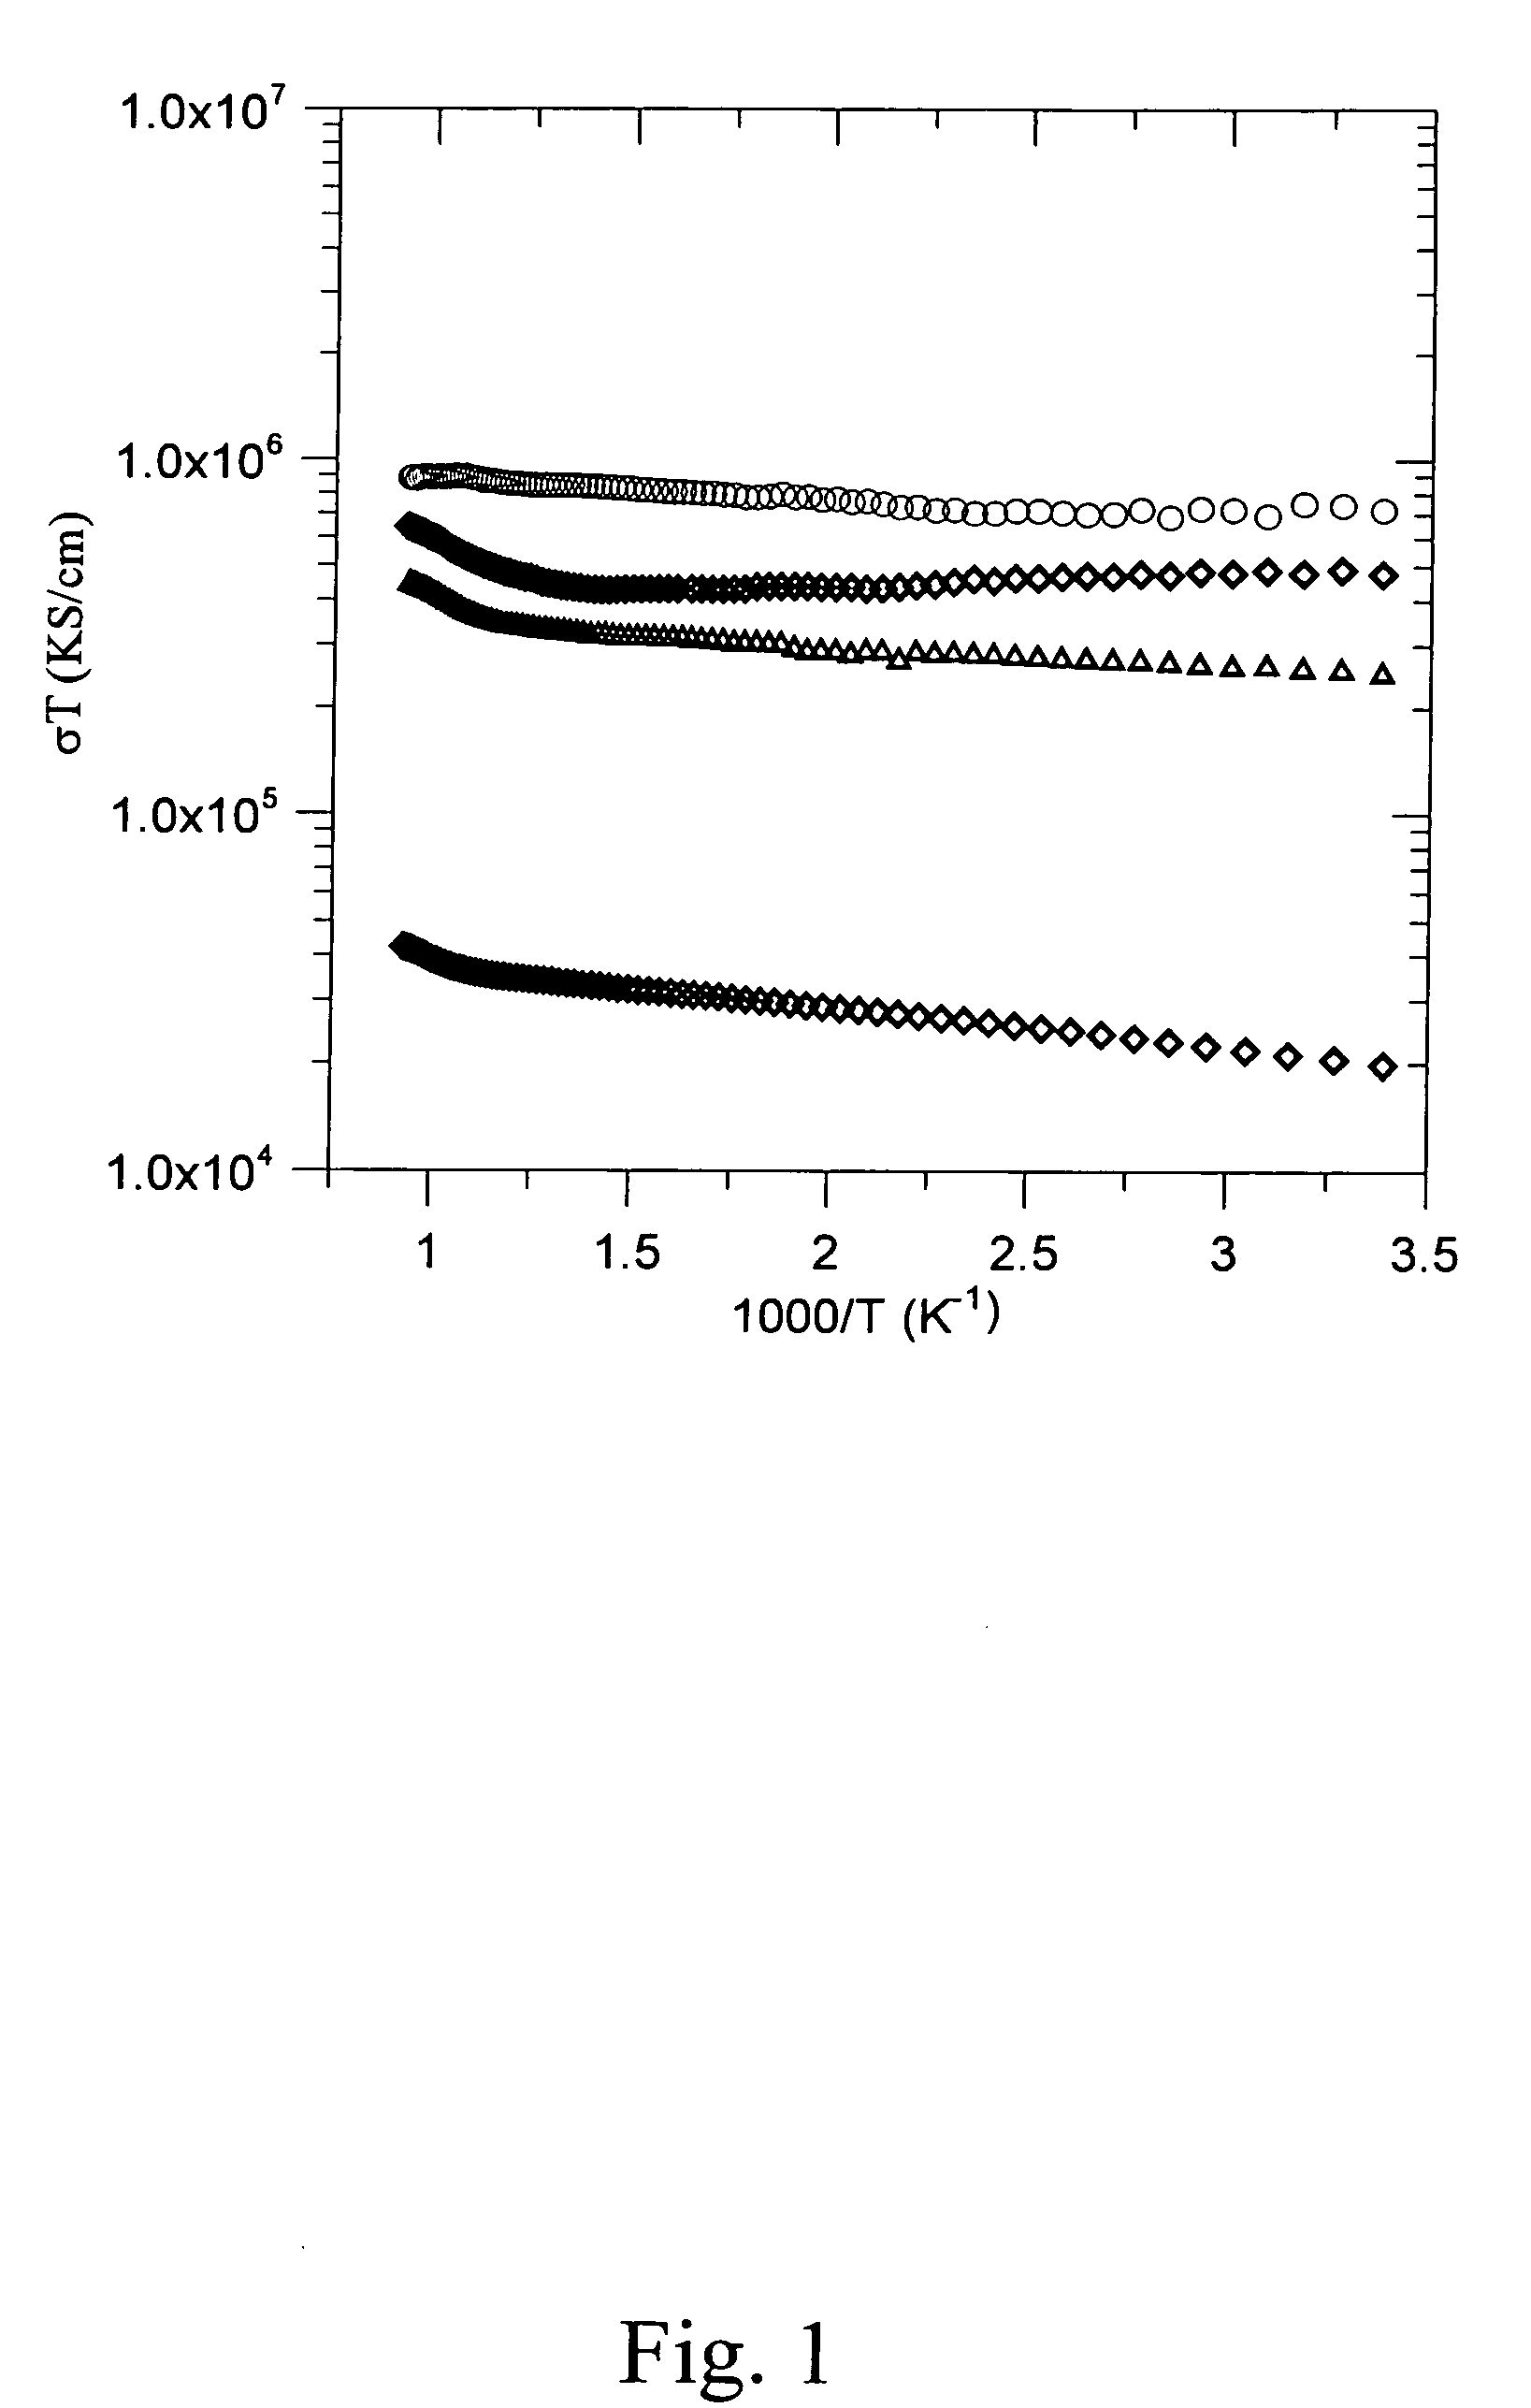 Materials for cathode in solid oxide fuel cells